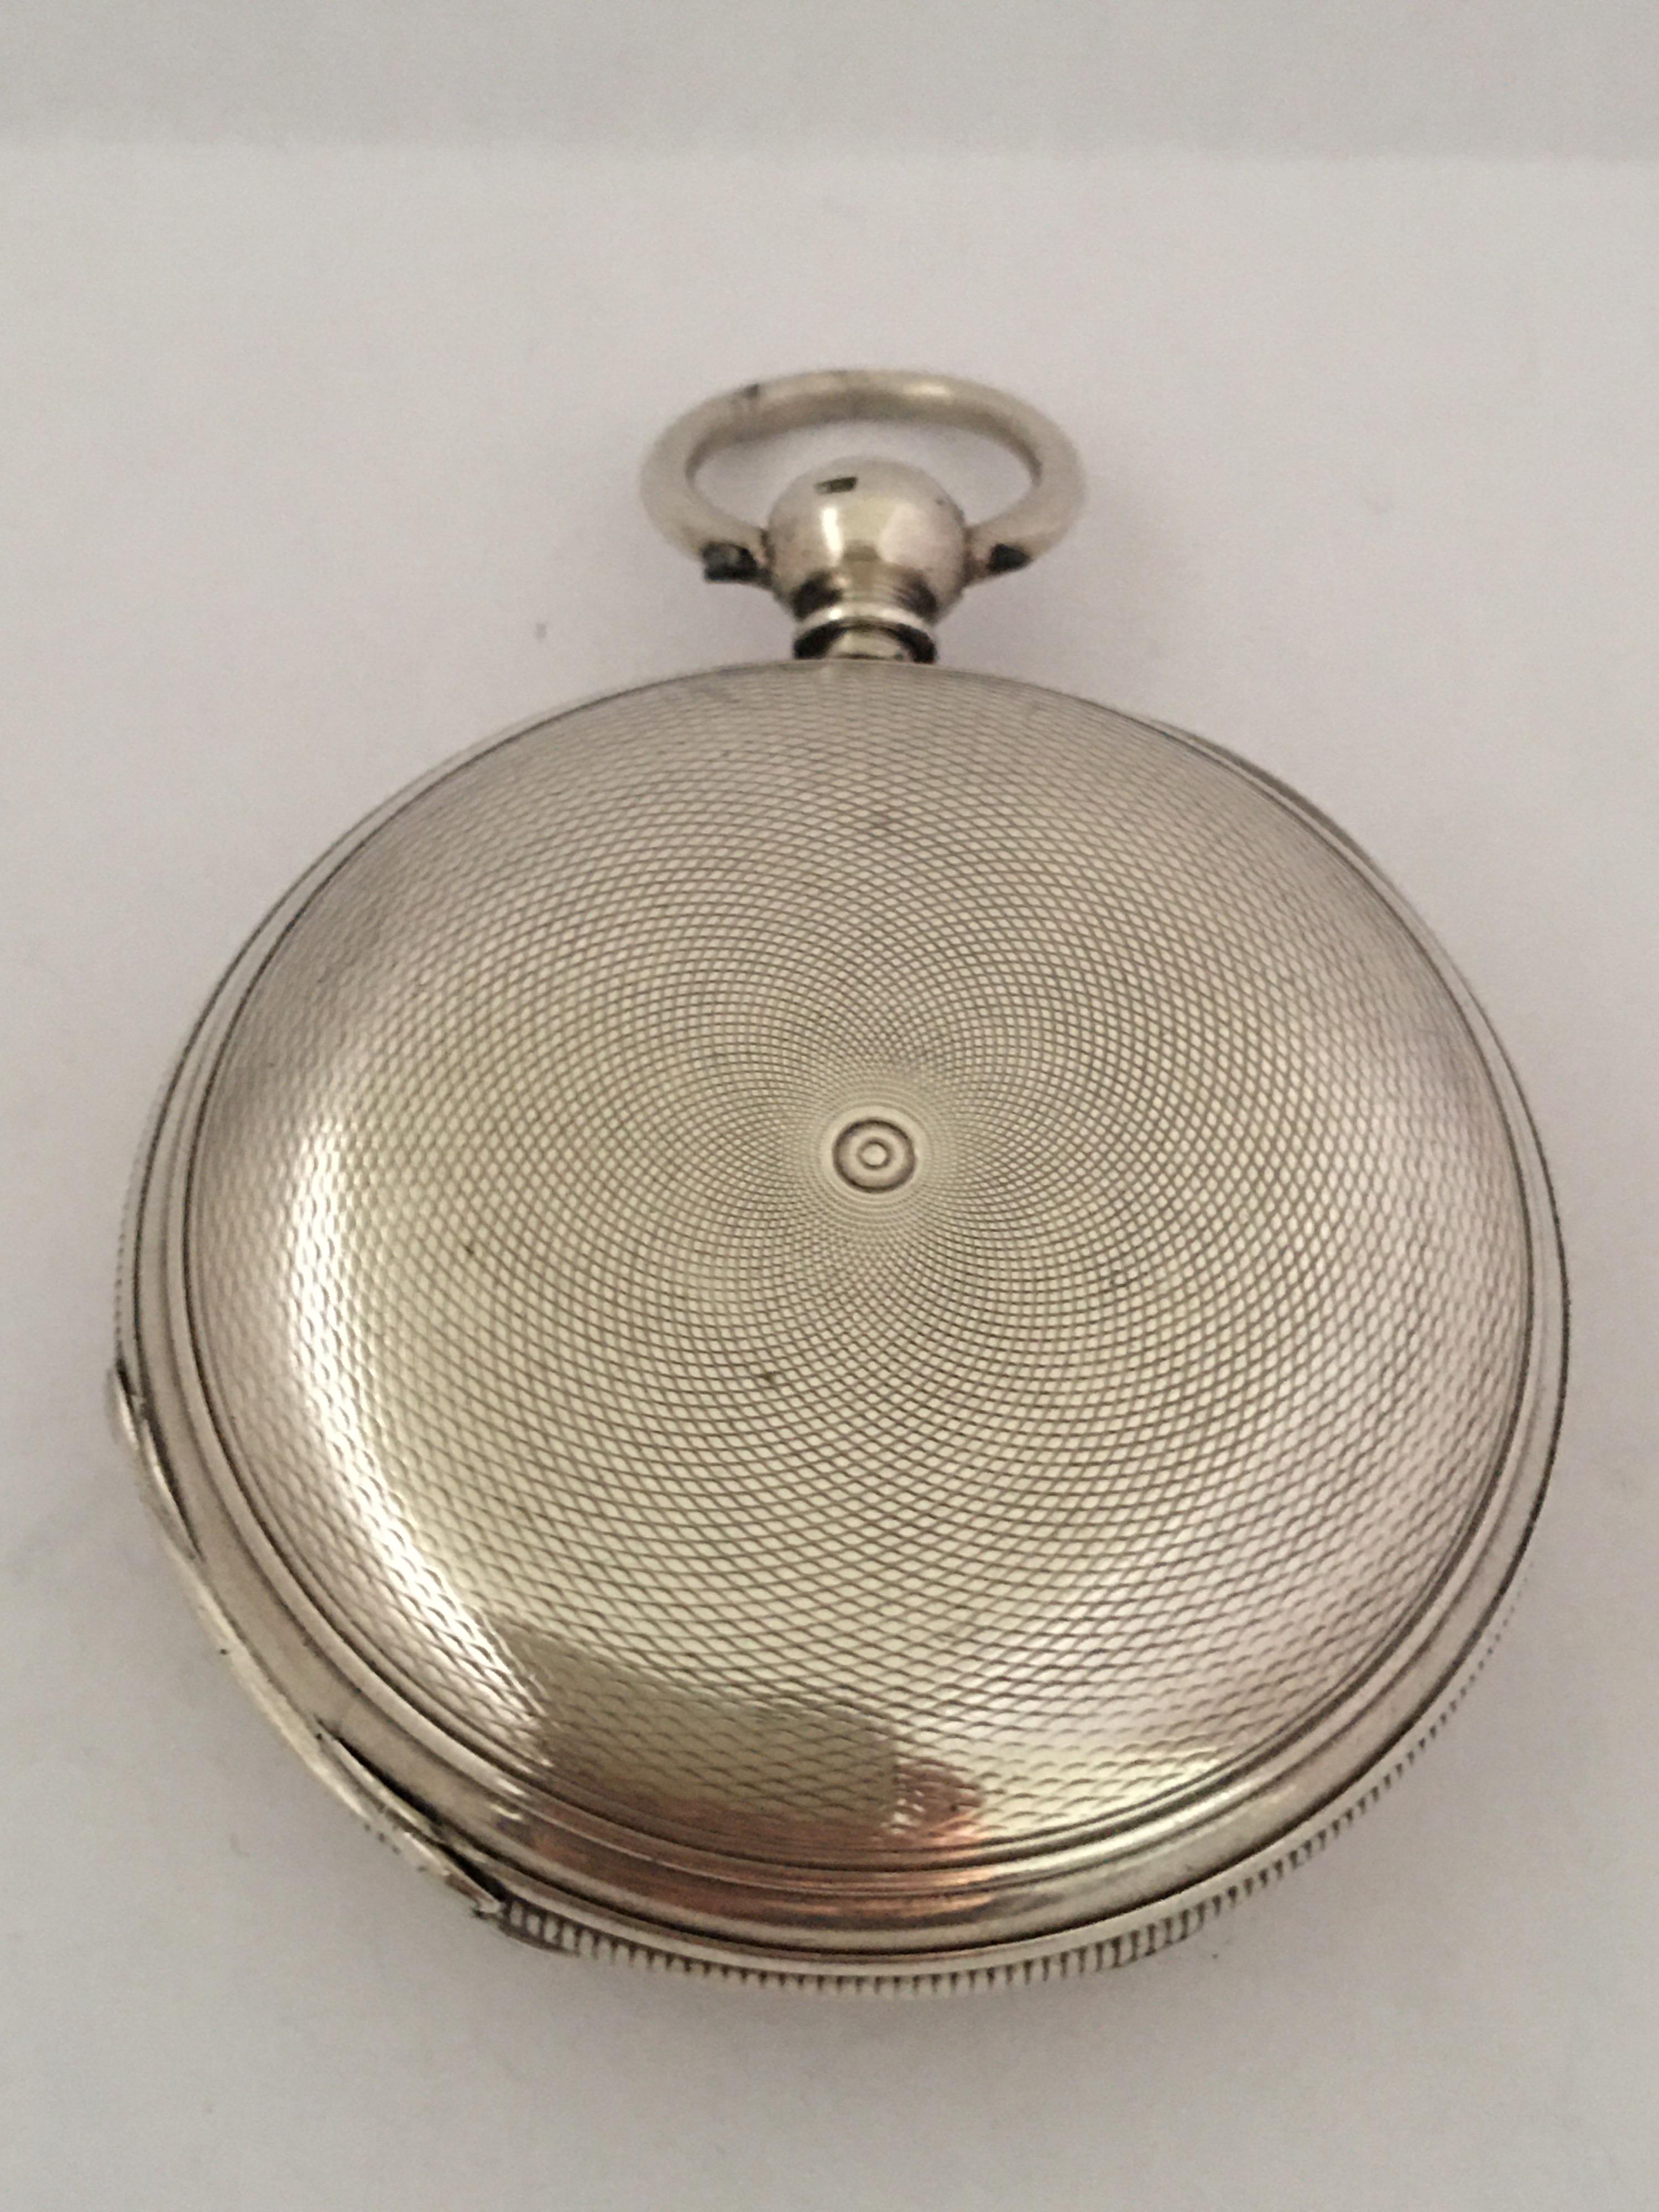 This Charming and good quality English Lever Fusee Silver Pocket watch is working and it is ticking well. It comes with a winding Key.

This watch shows a sign of aged and wearing, with its chipped and a hairline crack on the enamel dial as